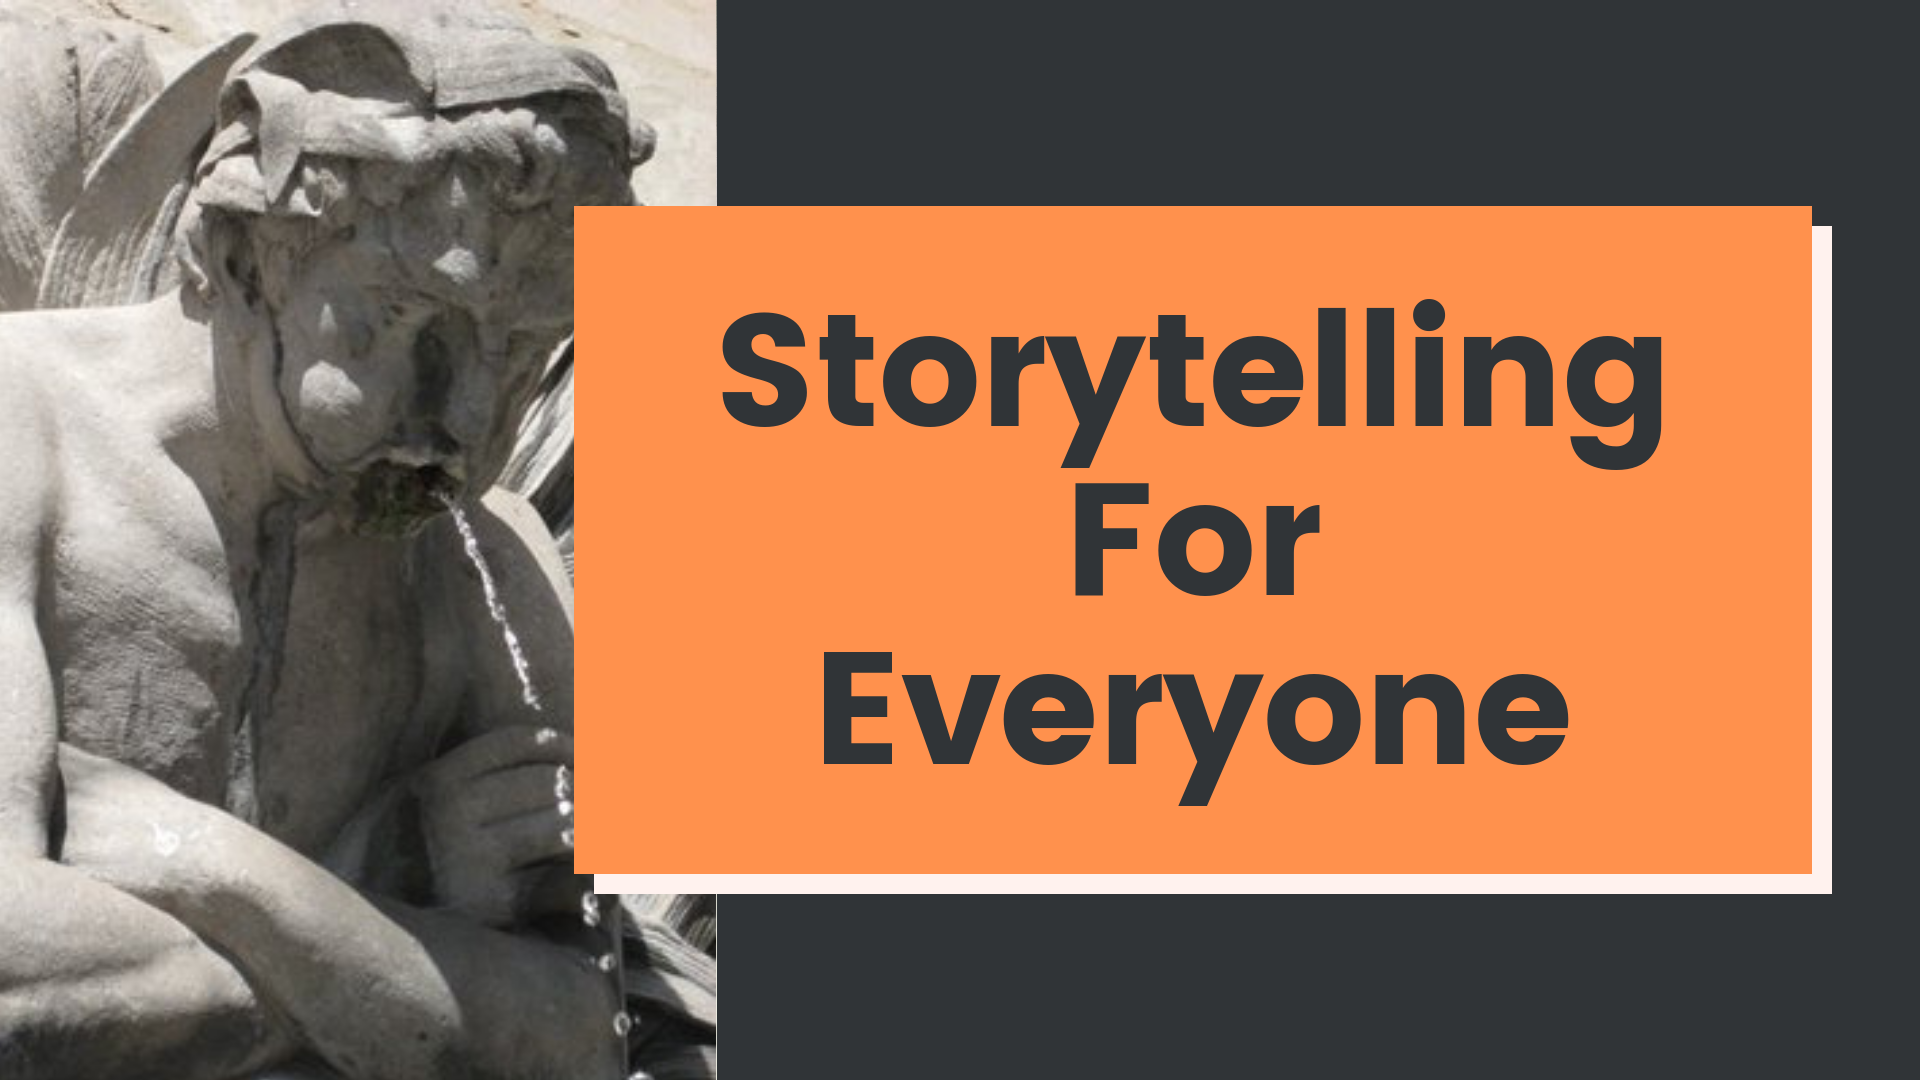 Storytelling For Everyone: Four Week Course in Personal Narrative (ONLINE - MONDAYS IN JUNE)